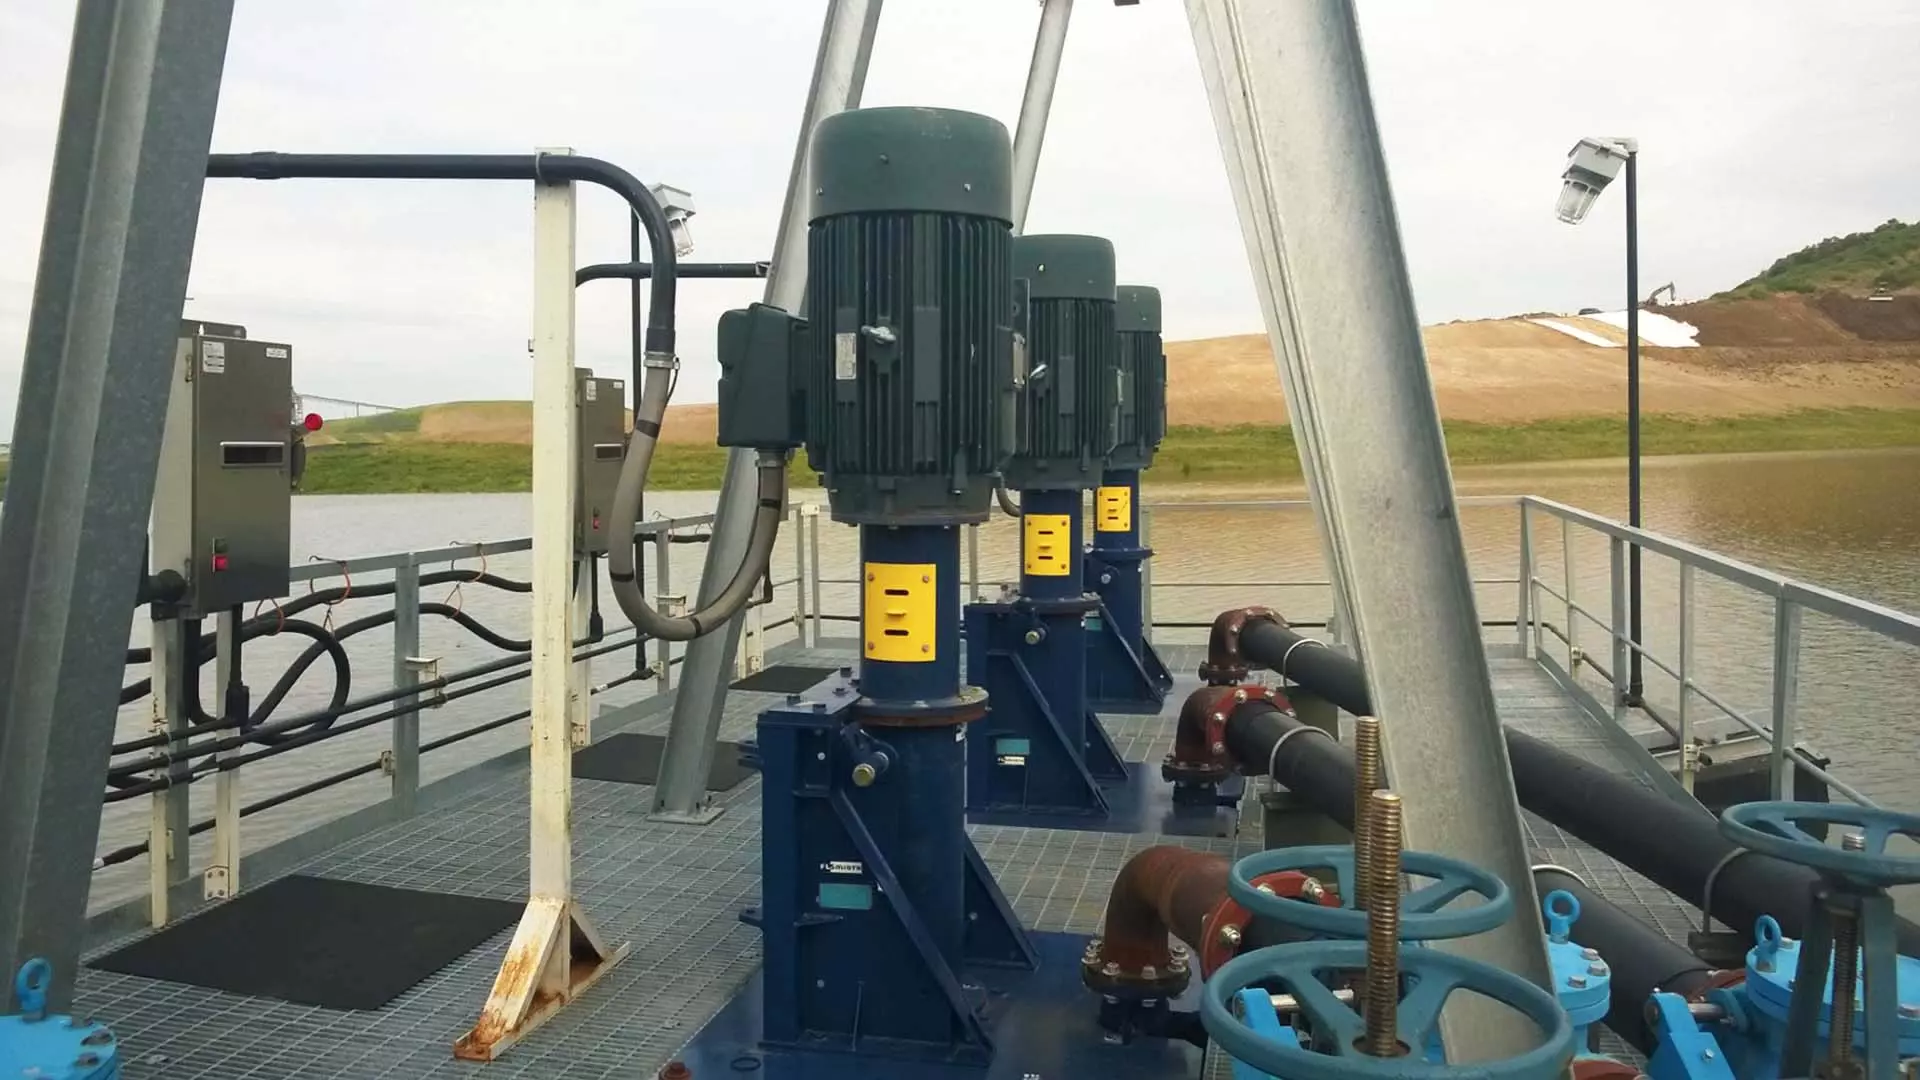 KREBS vMAX slurry for mining, coal and dredge applicaitons